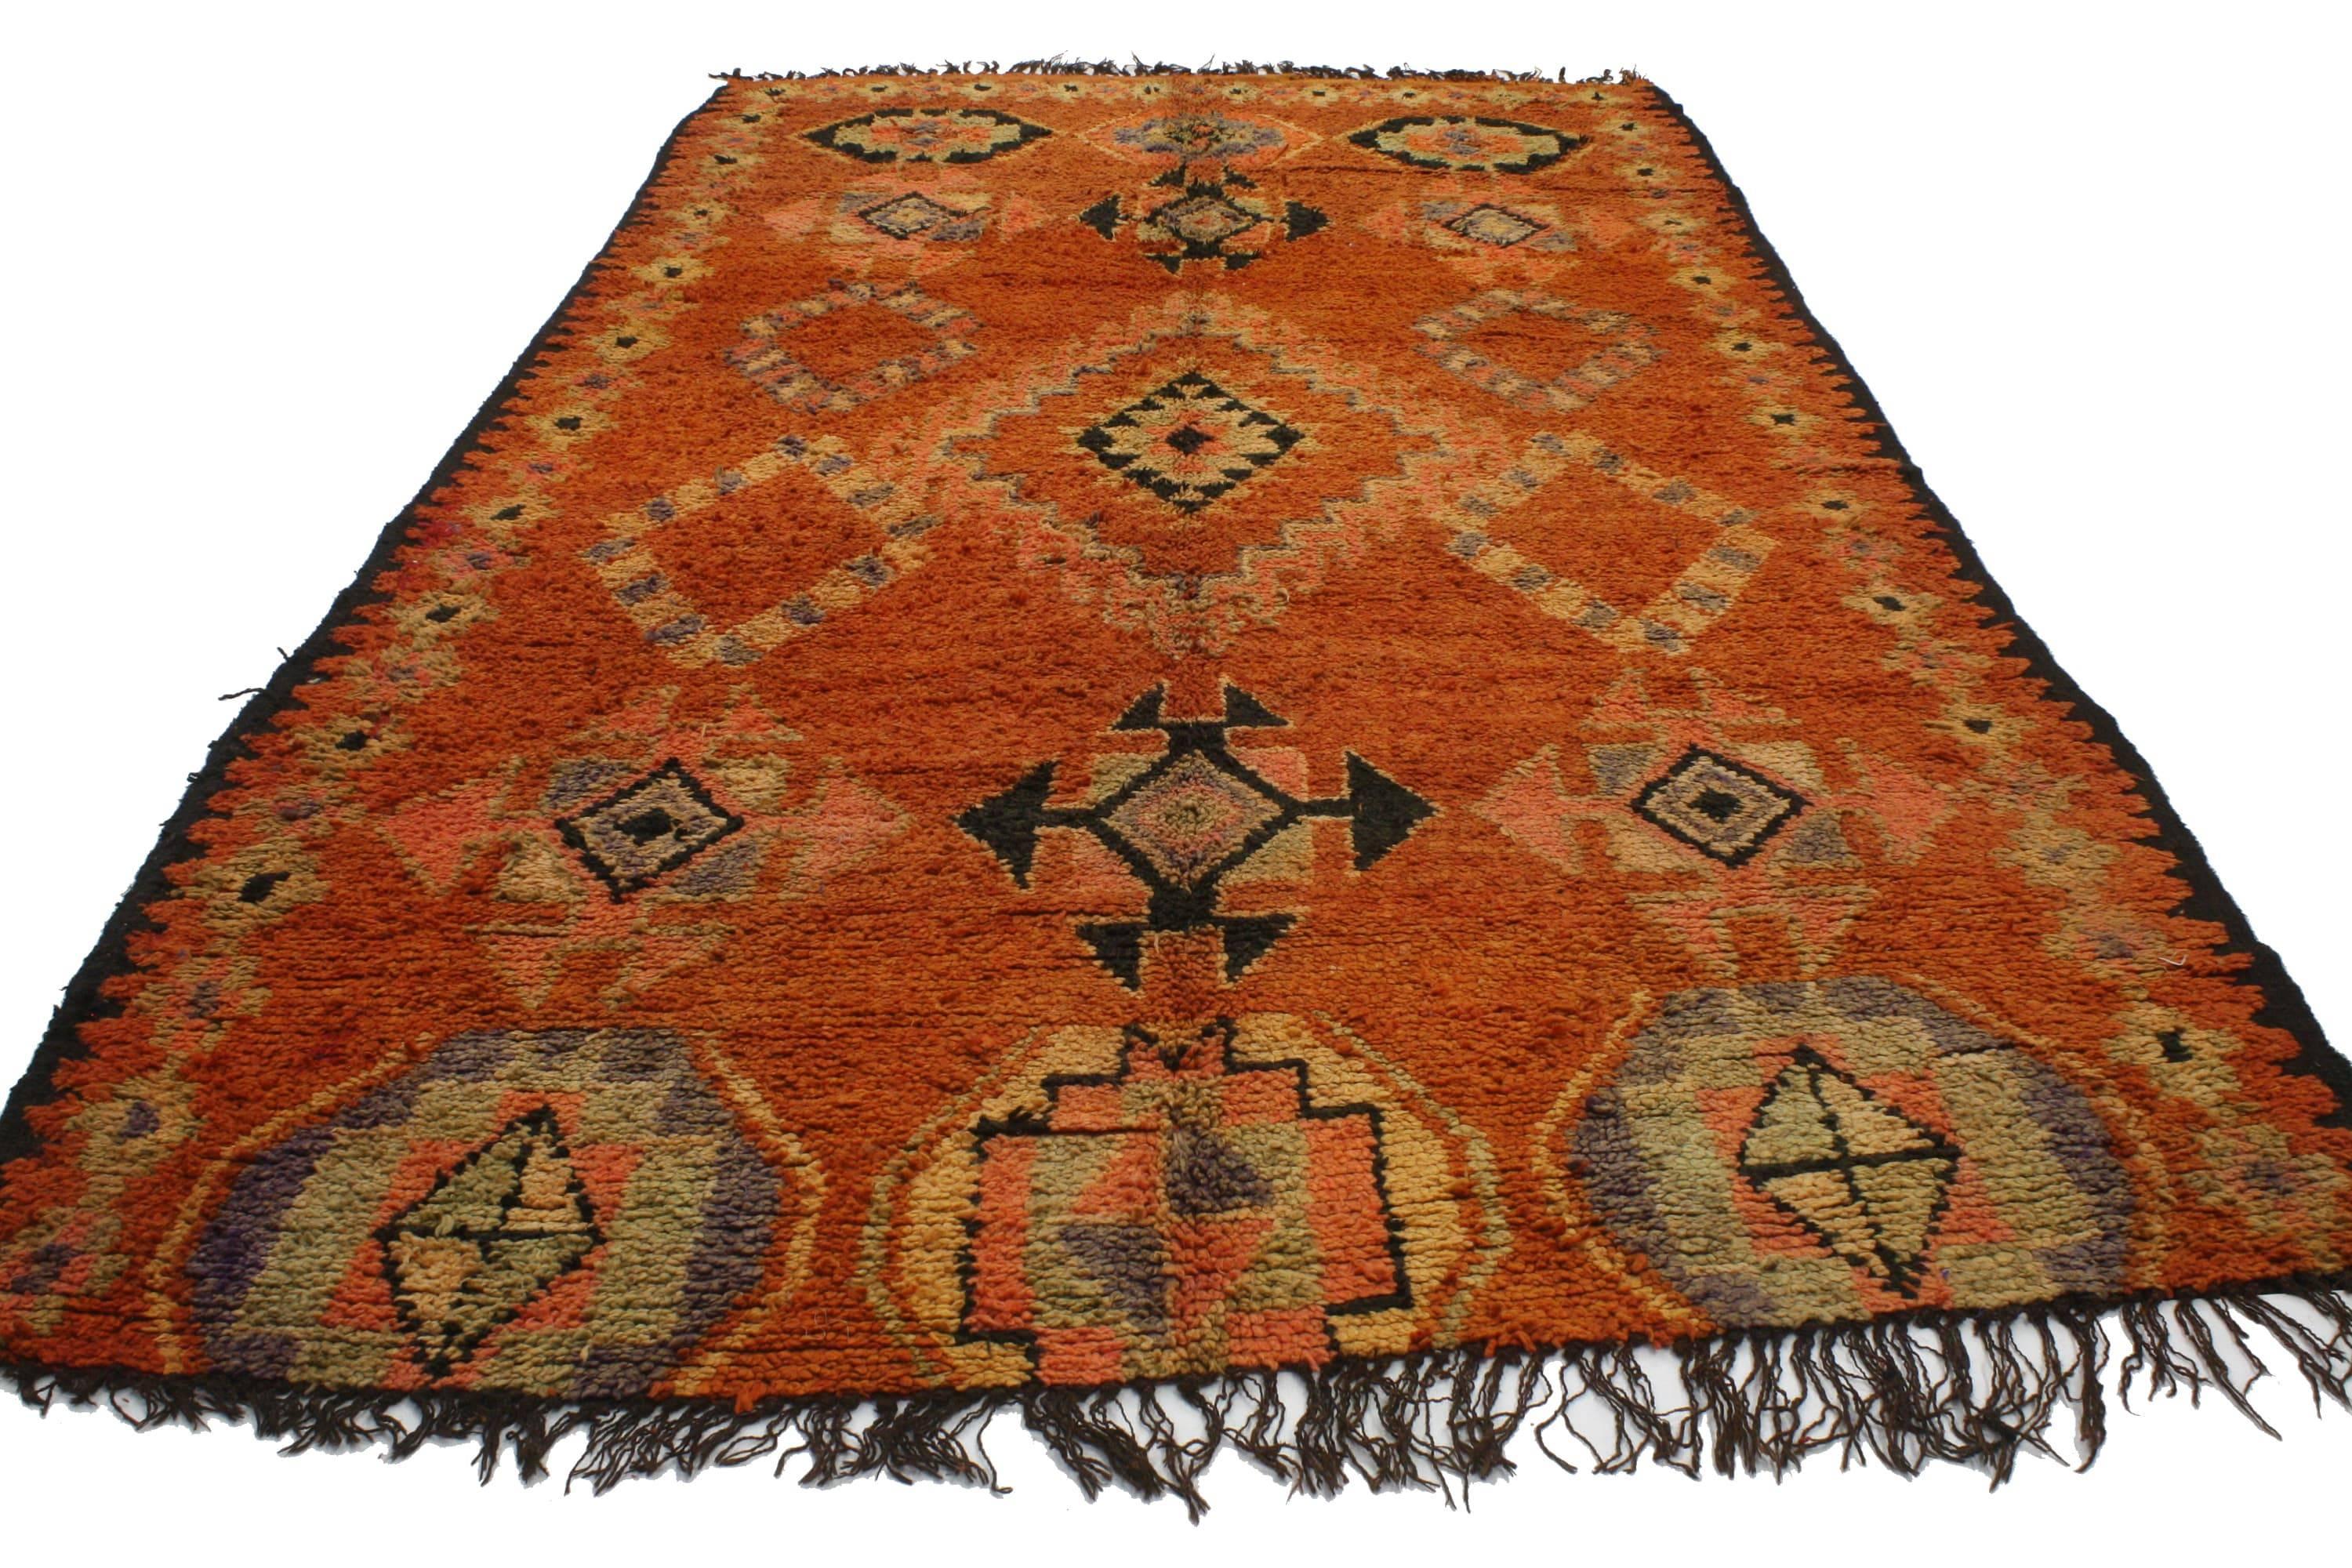 20207, vintage Berber Moroccan rug with tribal style. Vivacious color and rich waves of abrash provide a beautiful backdrop for the ancient Berber tribe symbols that overlay this hand-knotted wool vintage Berber Moroccan rug. Enclosed by a Baraka